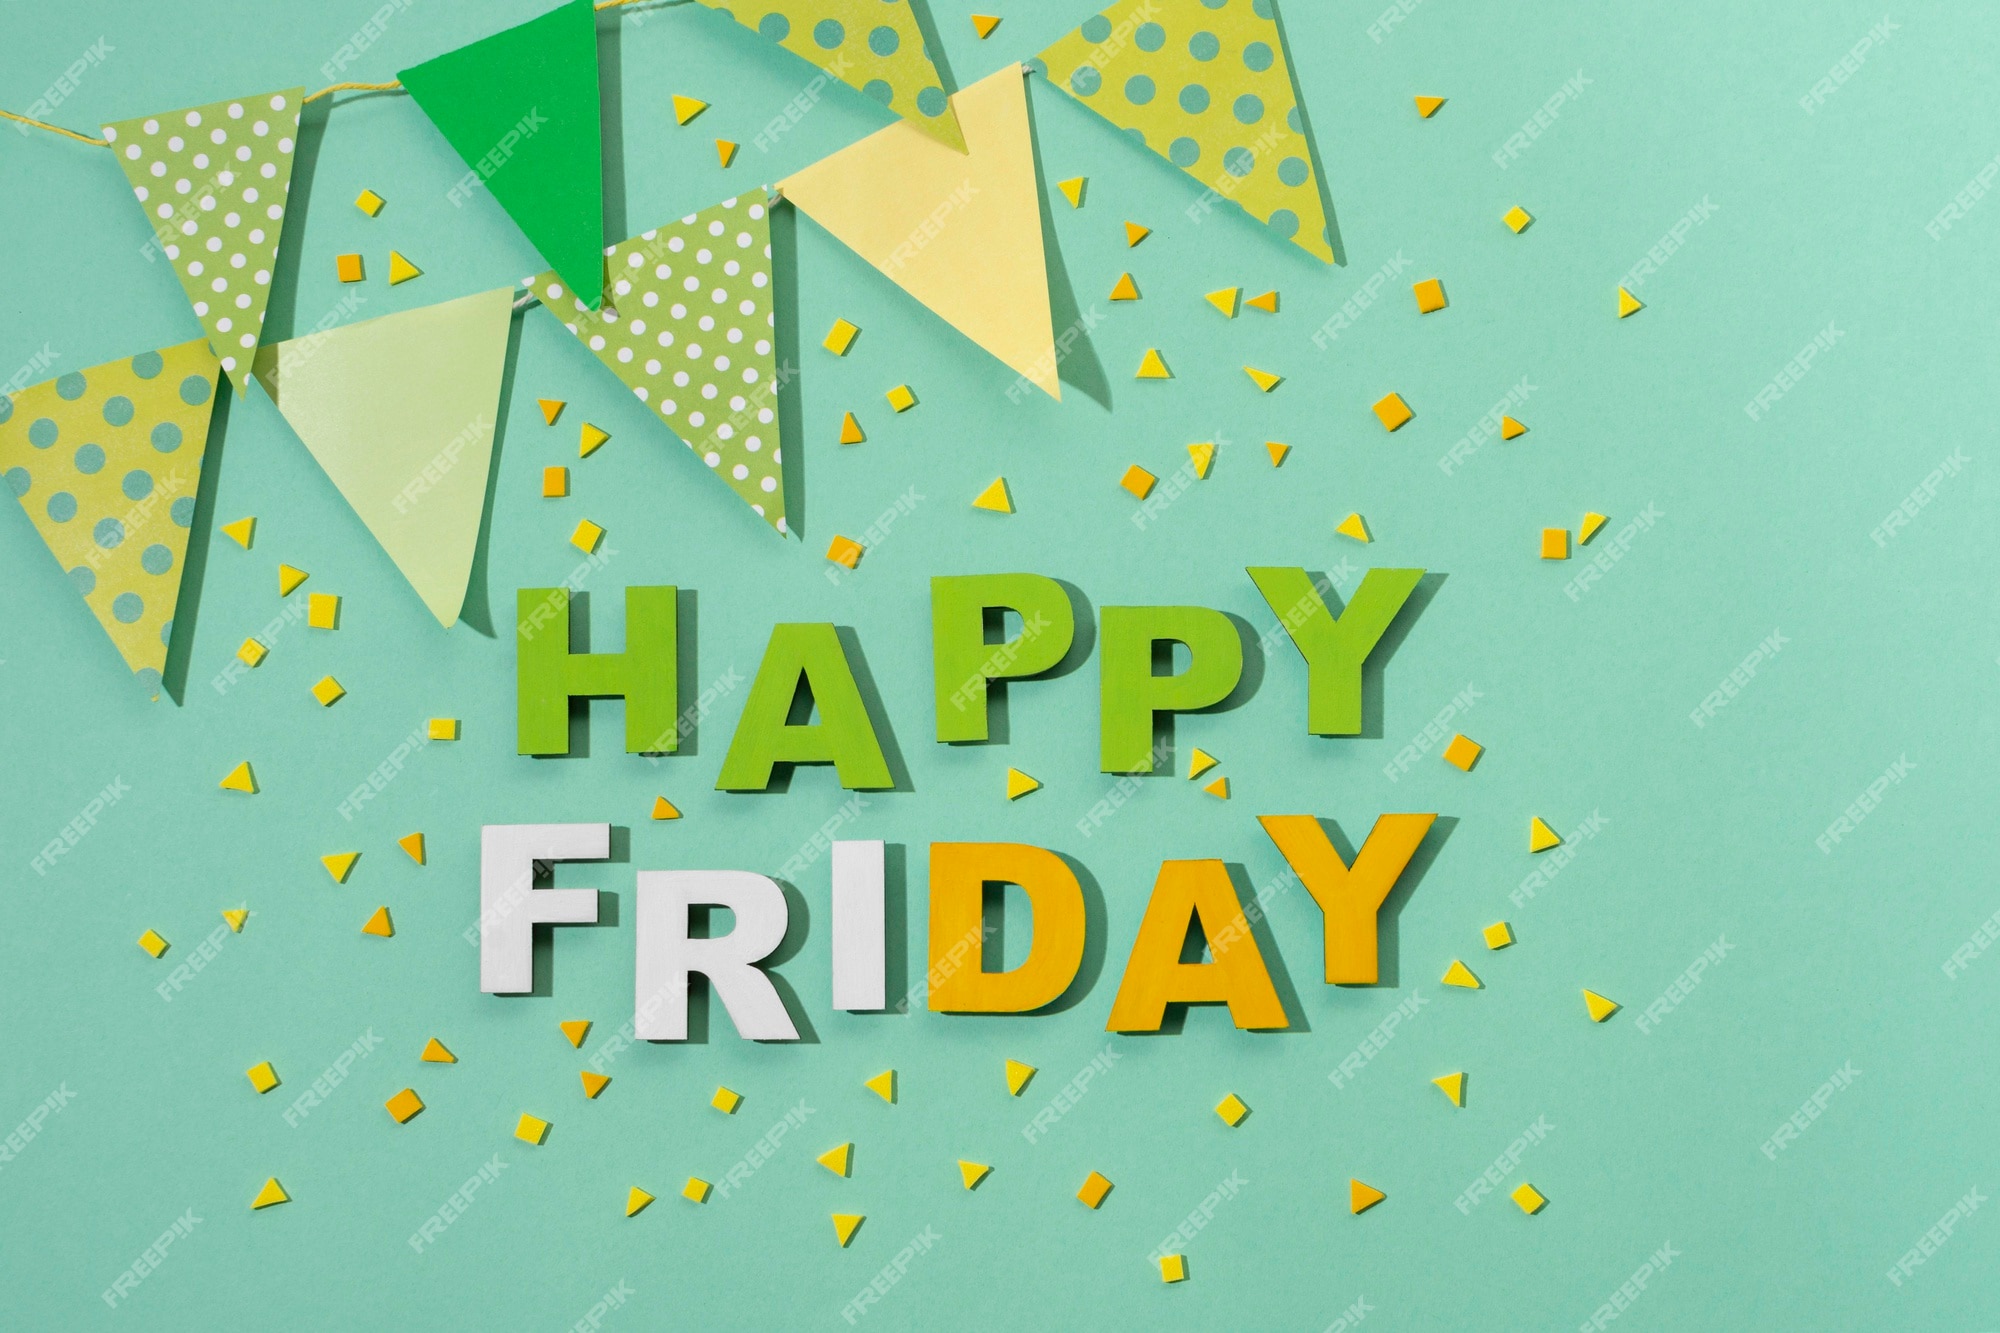 happy-friday-lettering-paper-style_23-2149006234.jpg